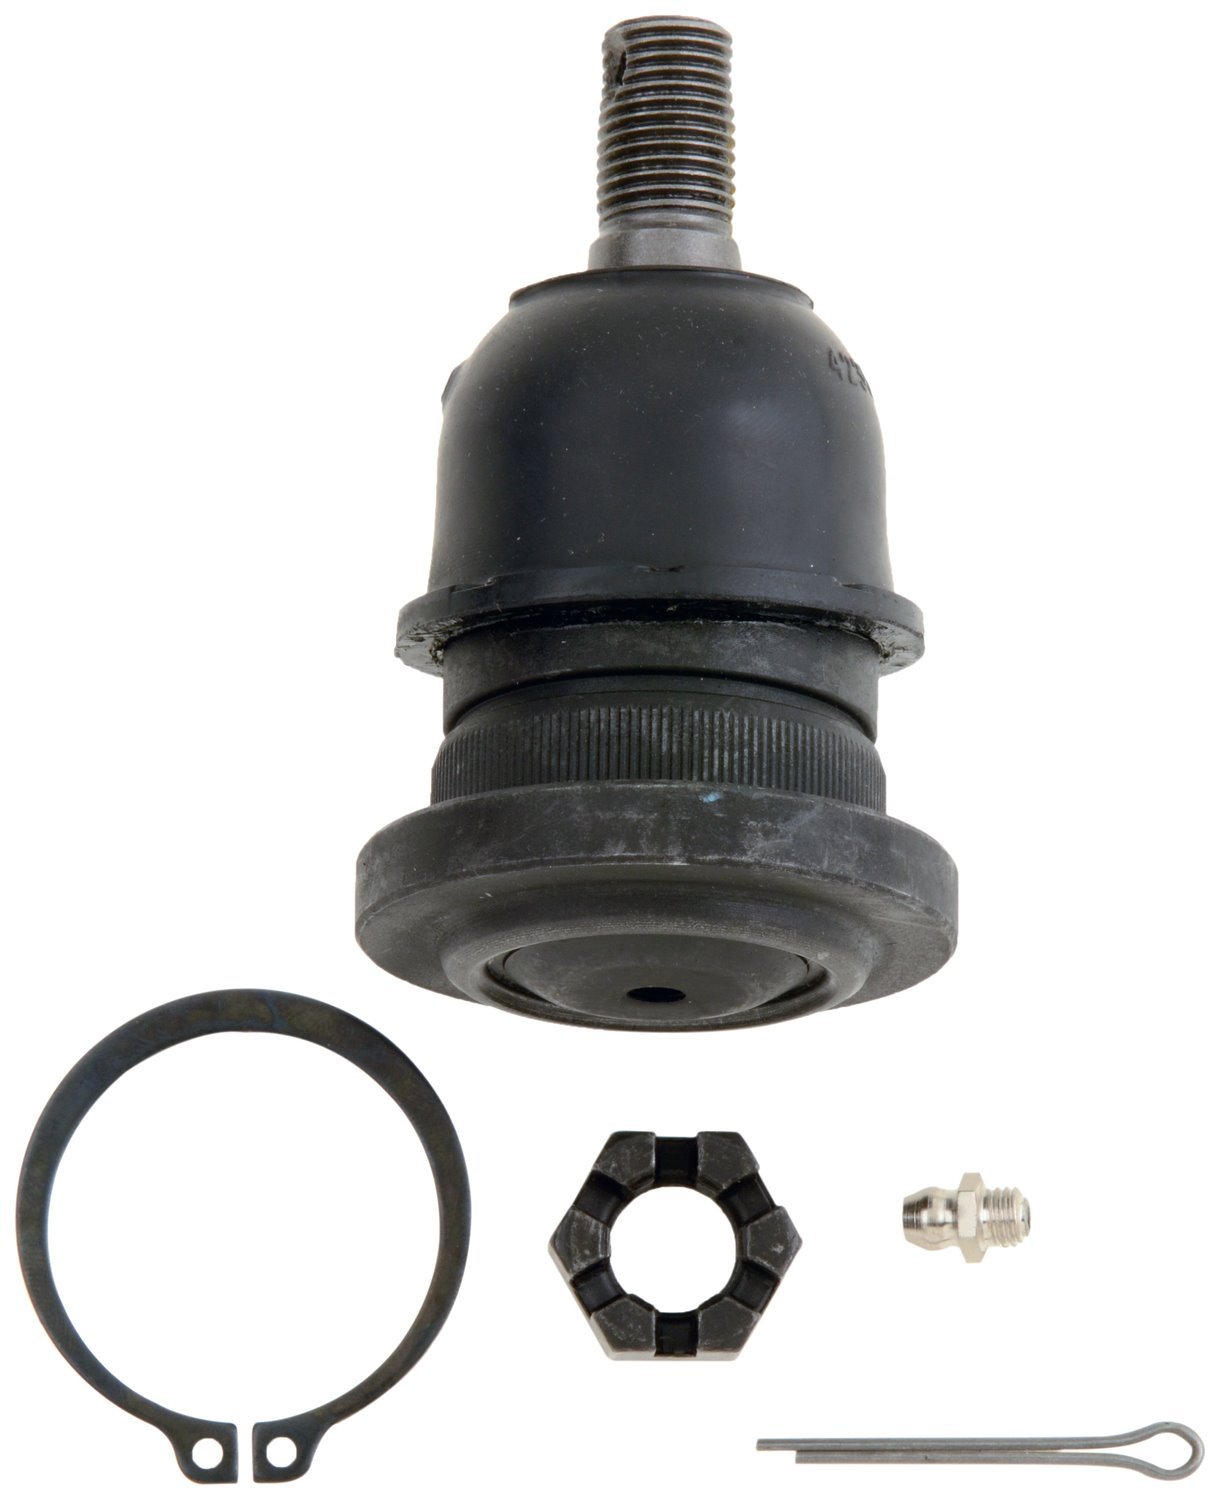 JBJ957 Ball Joint Fits Select Toyota Models, Position: Left/Driver or Right/Passenger, Front Upper